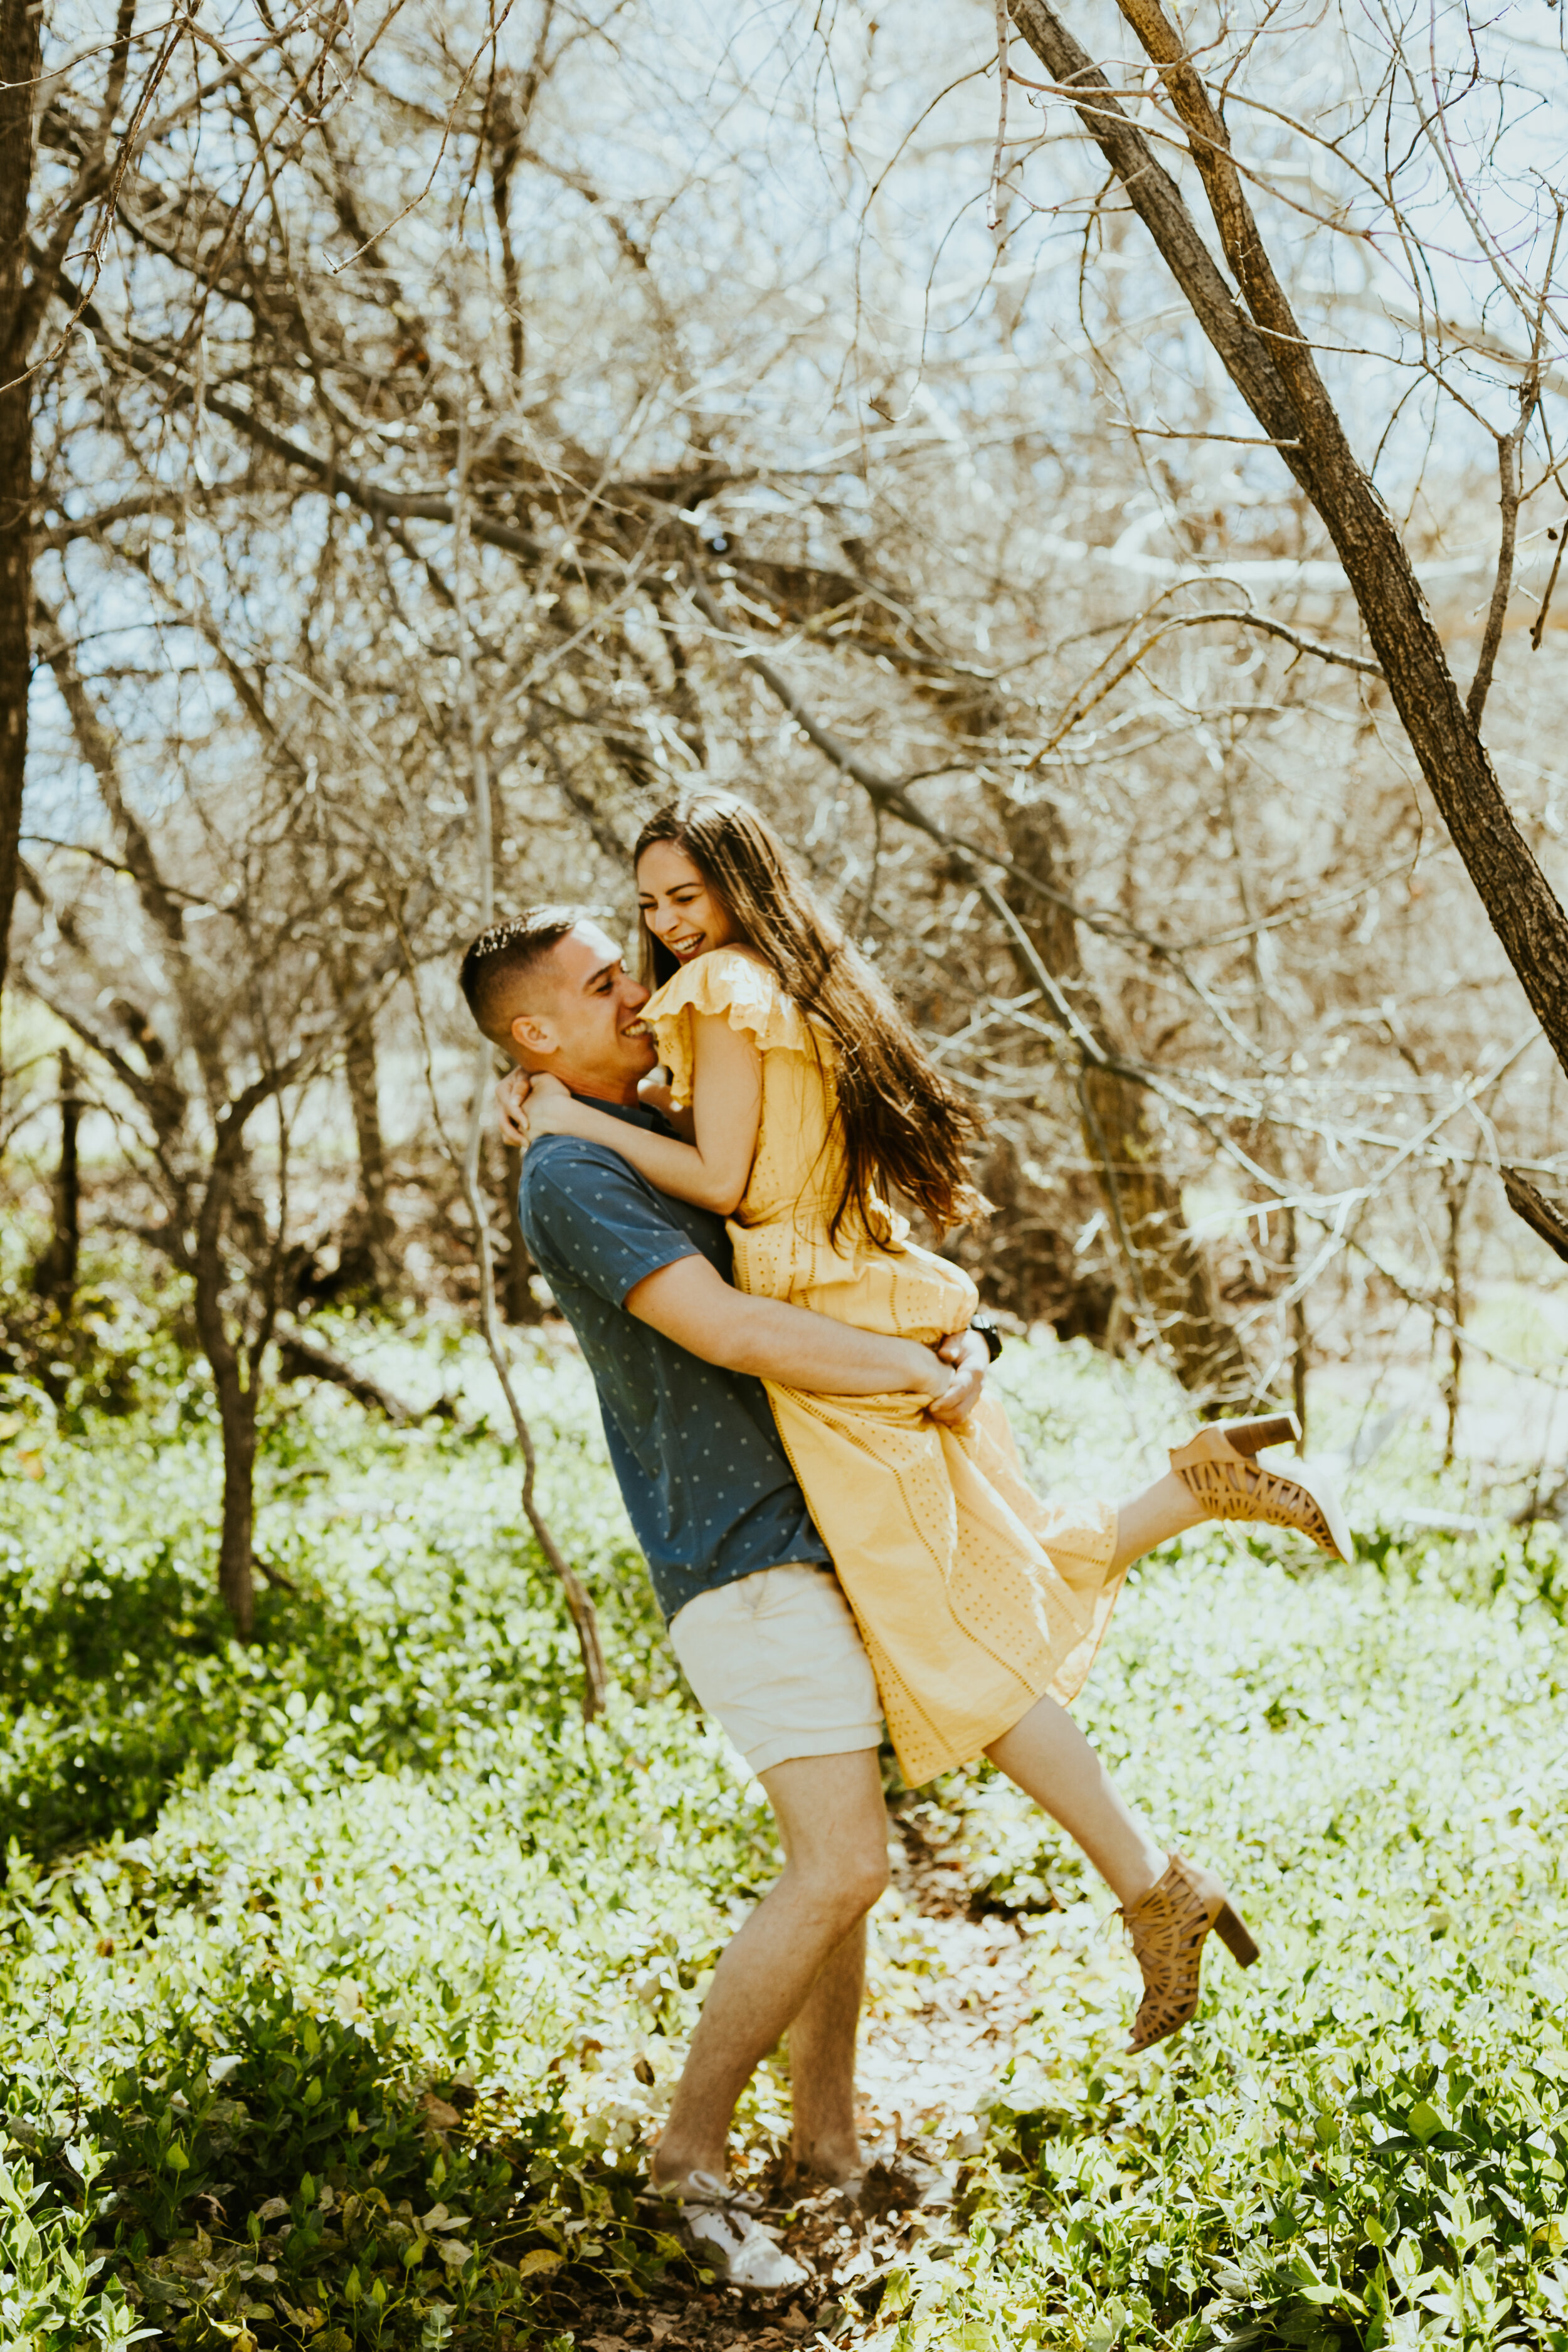 red rock crossing sedona arizona cathedral rock crescent moon ranch couple photos engagement photo outfit inspiration couple posing ideas midday photos anniversary photos-6.jpg